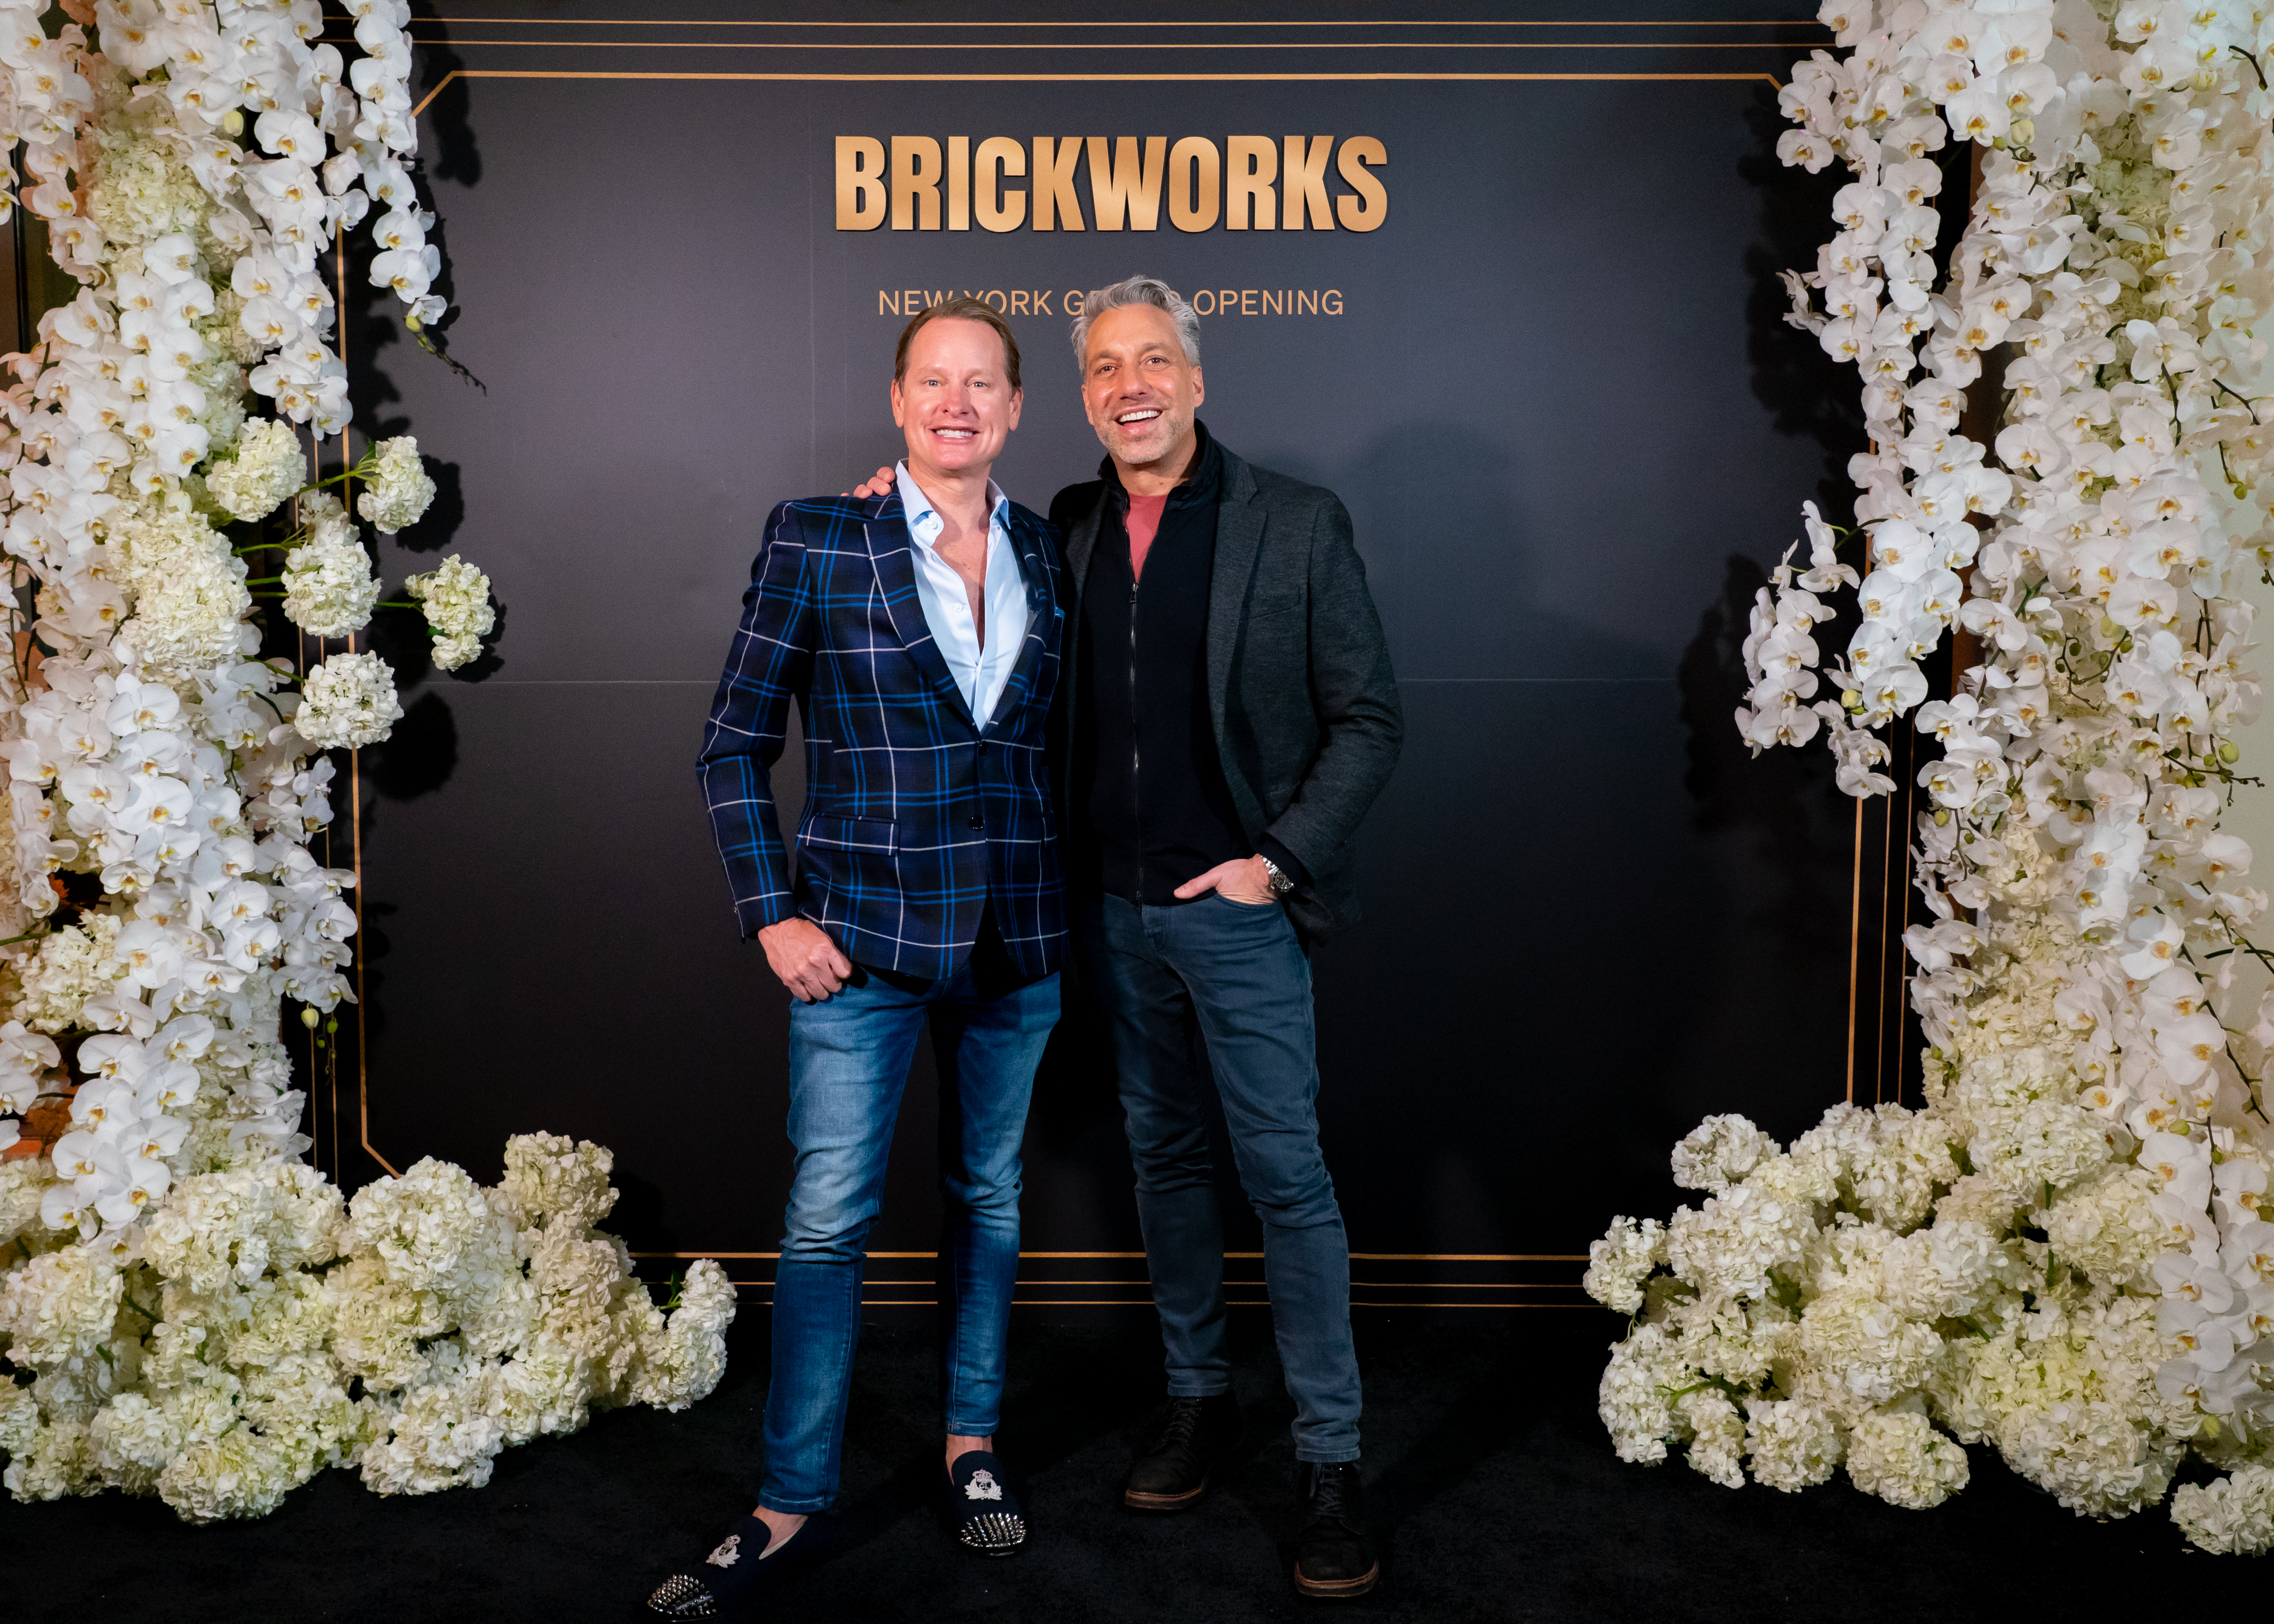 Welcome to the Brickworks worldwide flagship Design Studio in NYC